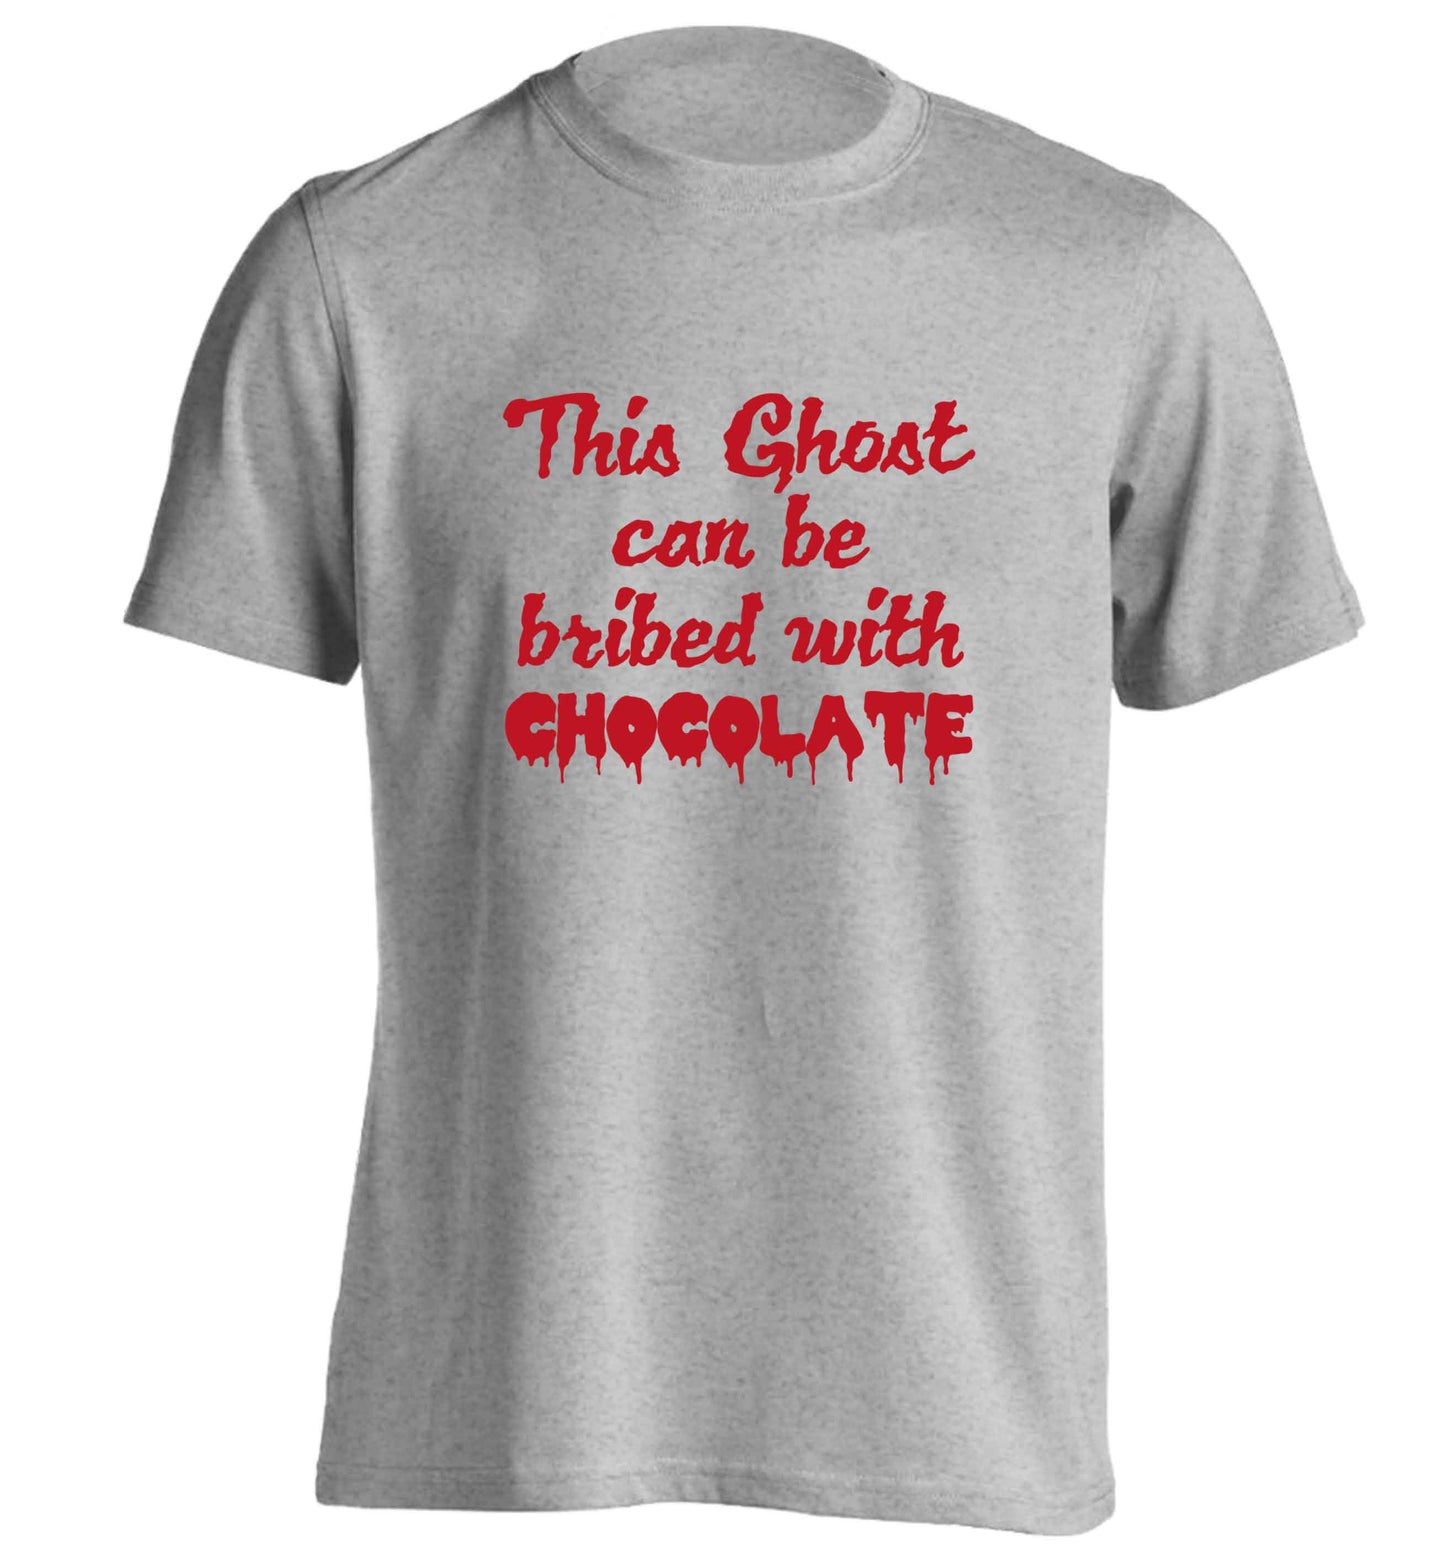 This ghost can be bribed with chocolate adults unisex grey Tshirt 2XL